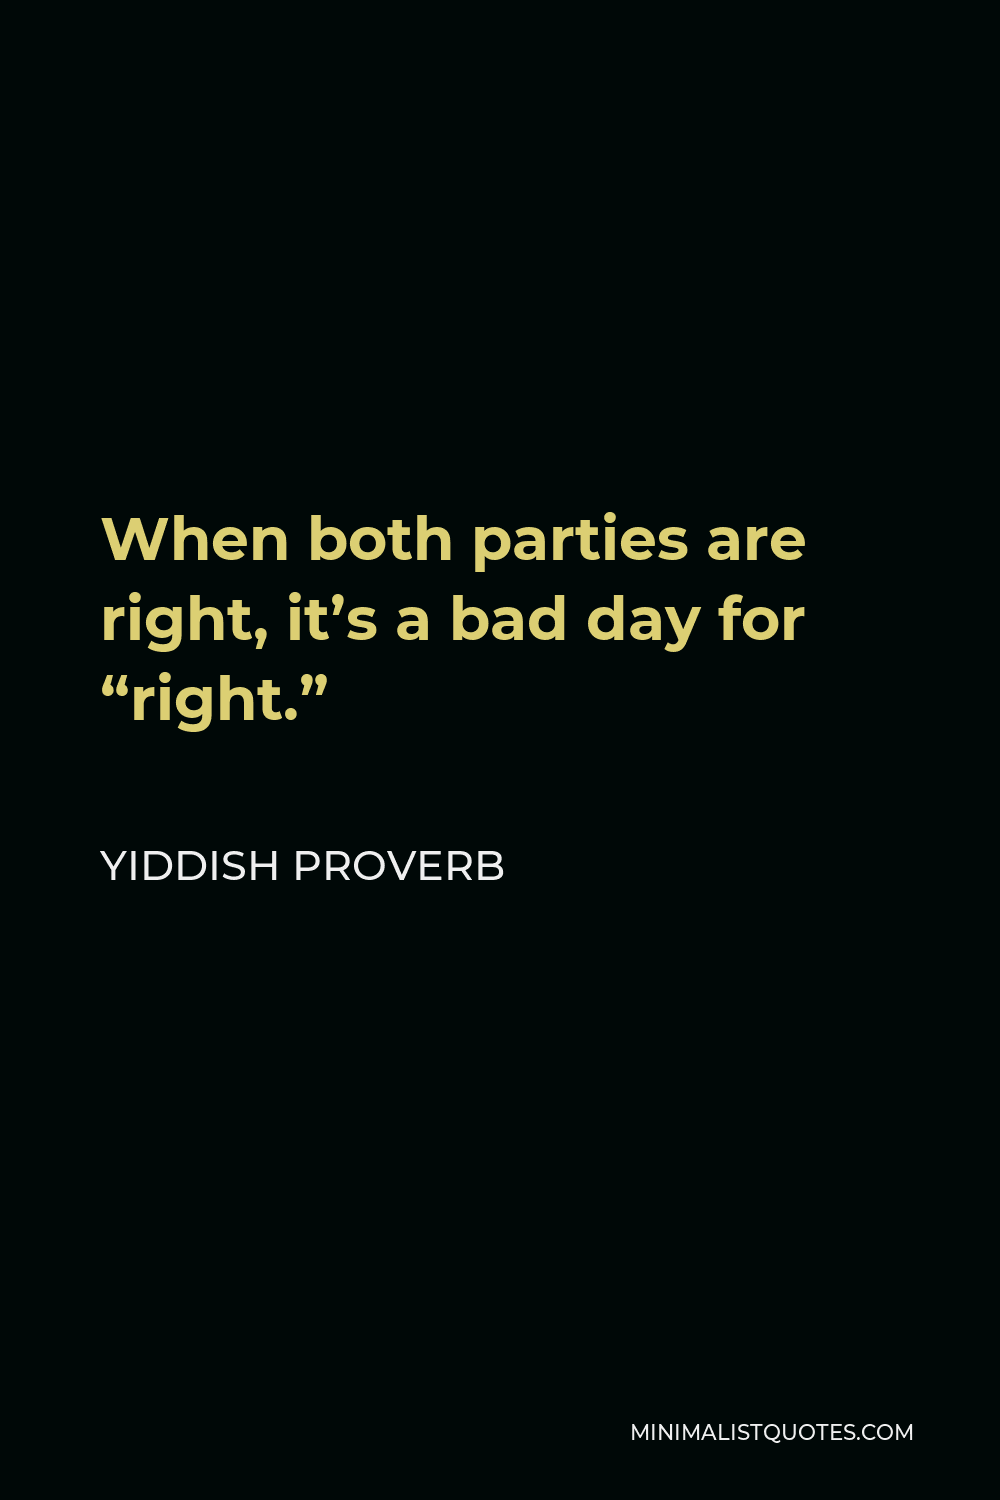 Yiddish Proverb Quote - When both parties are right, it’s a bad day for “right.”